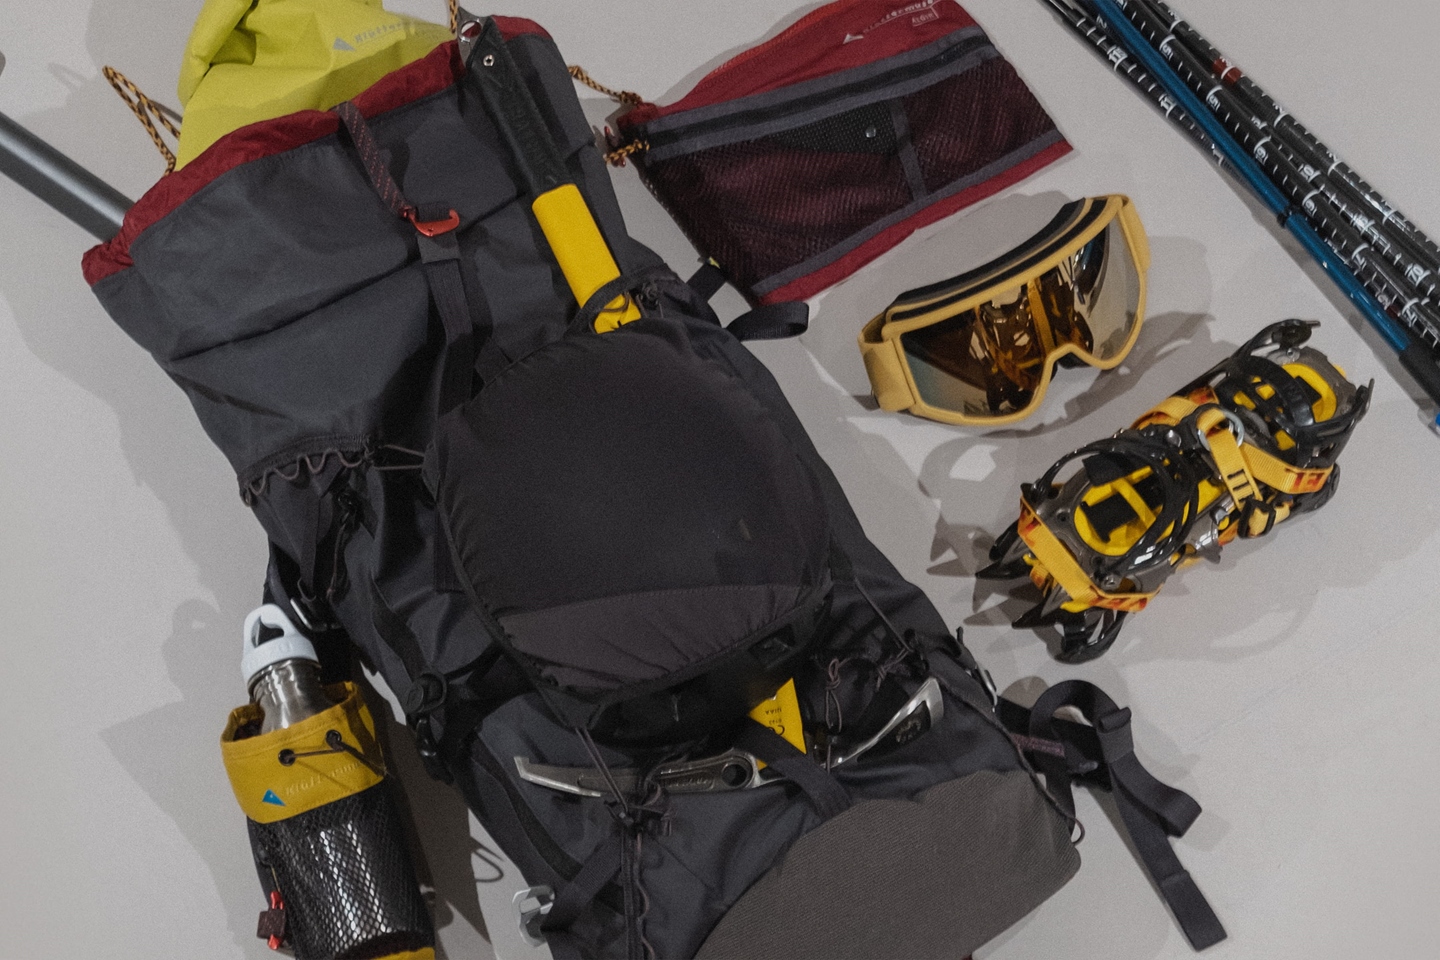 Packing of Ull Backpack with skiing equipment